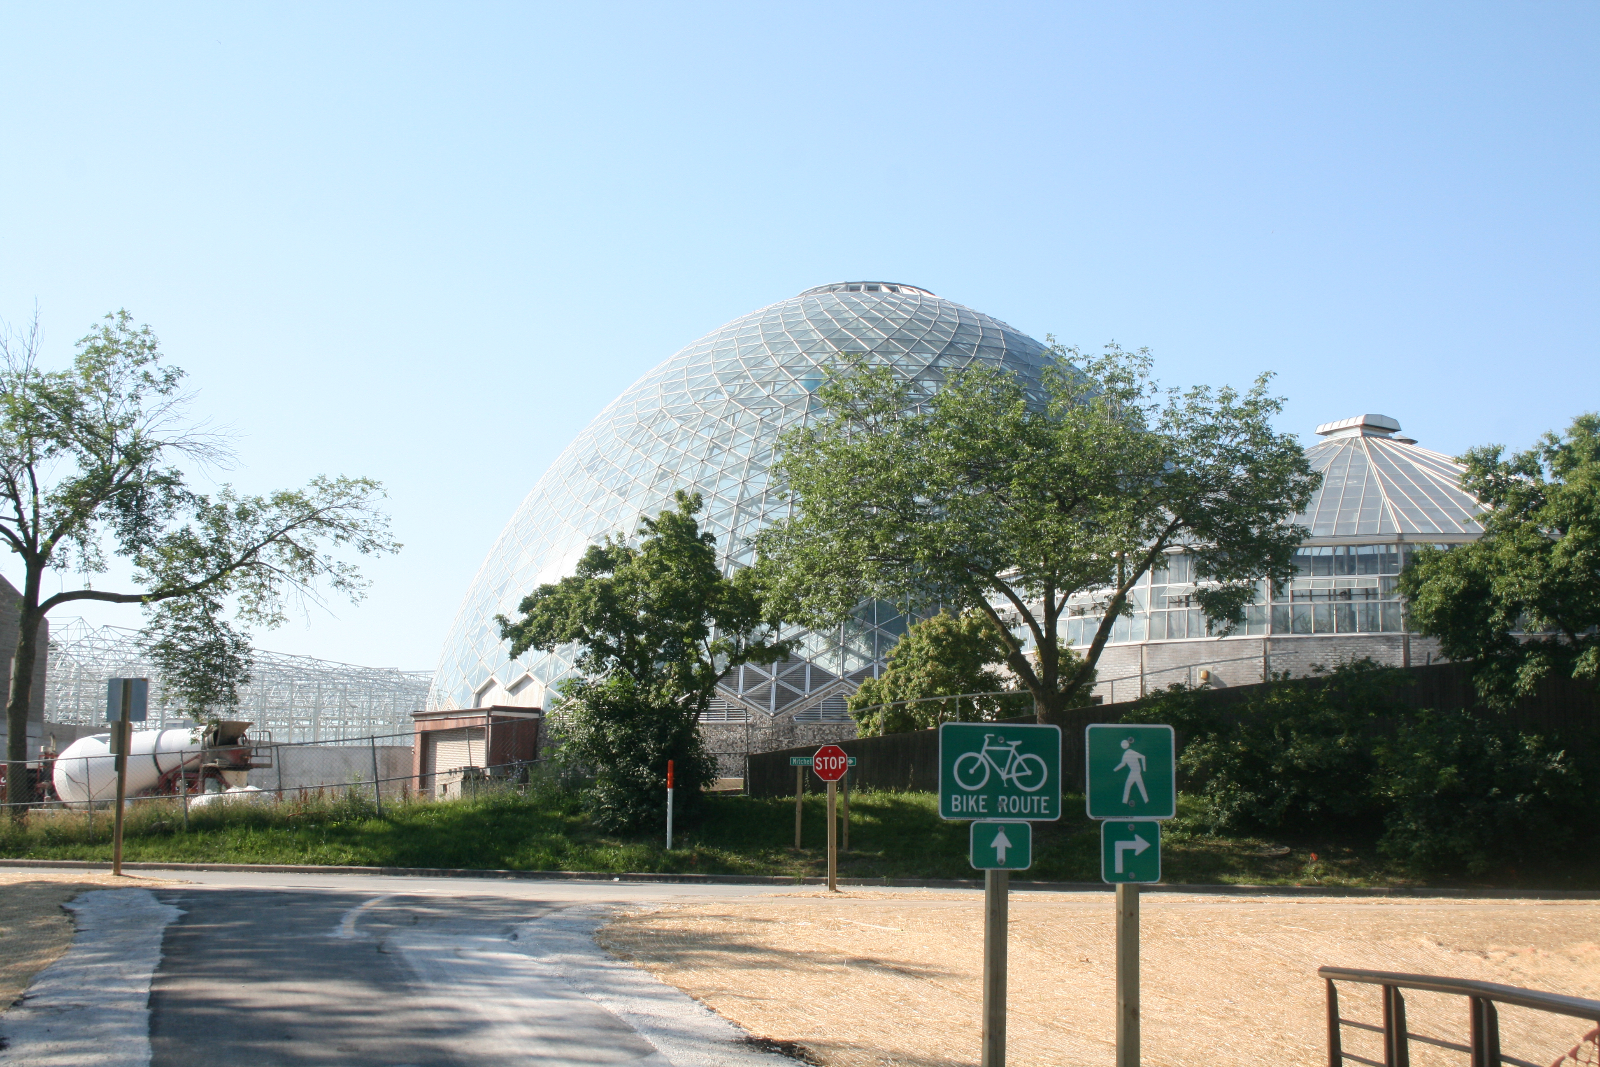 Mitchell Park Horticultural Conservatory 